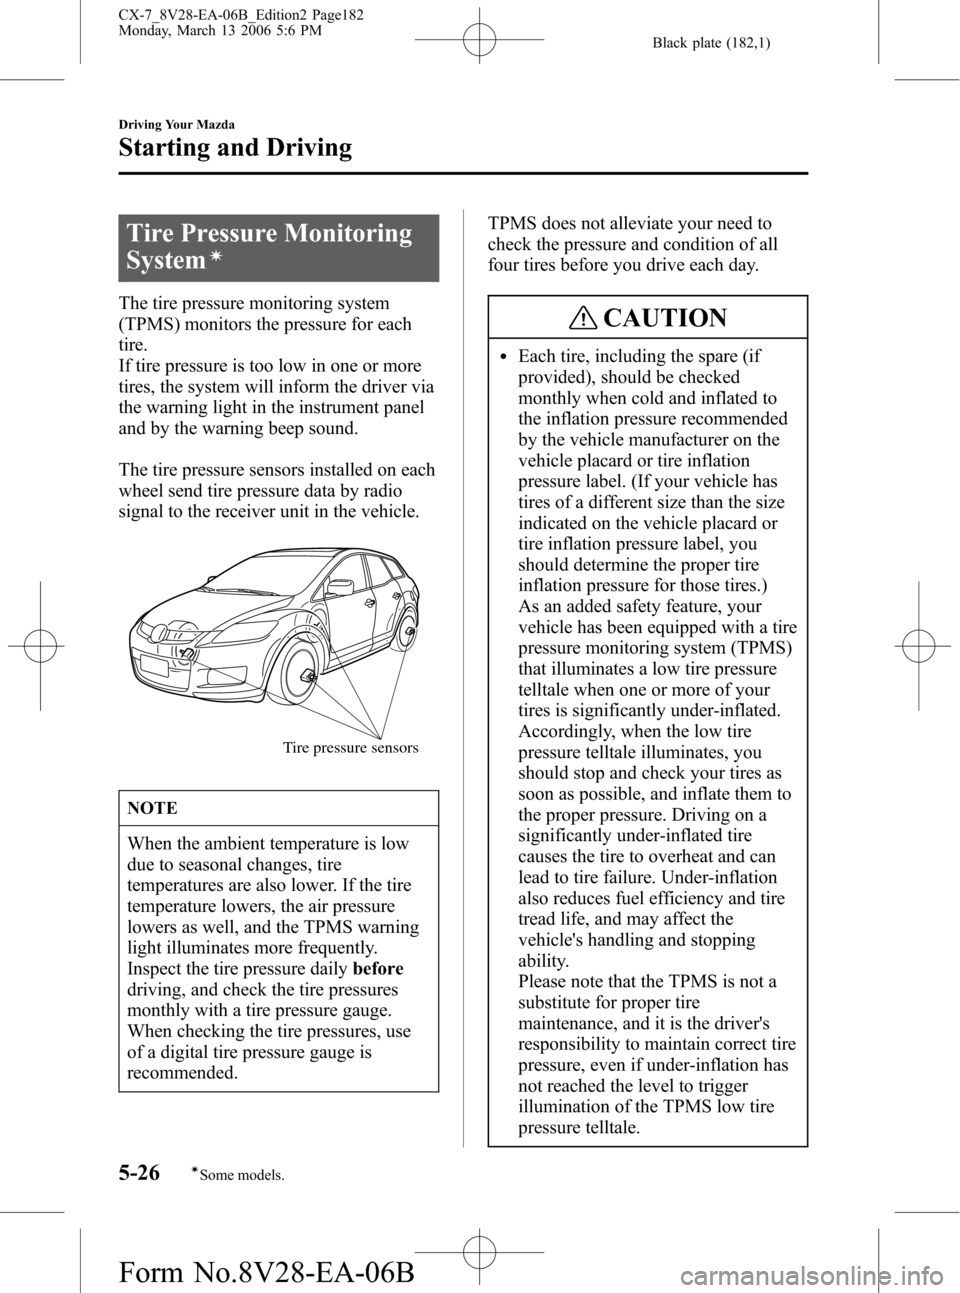 MAZDA MODEL CX-7 2007  Owners Manual (in English) Black plate (182,1)
Tire Pressure Monitoring
System
í
The tire pressure monitoring system
(TPMS) monitors the pressure for each
tire.
If tire pressure is too low in one or more
tires, the system will